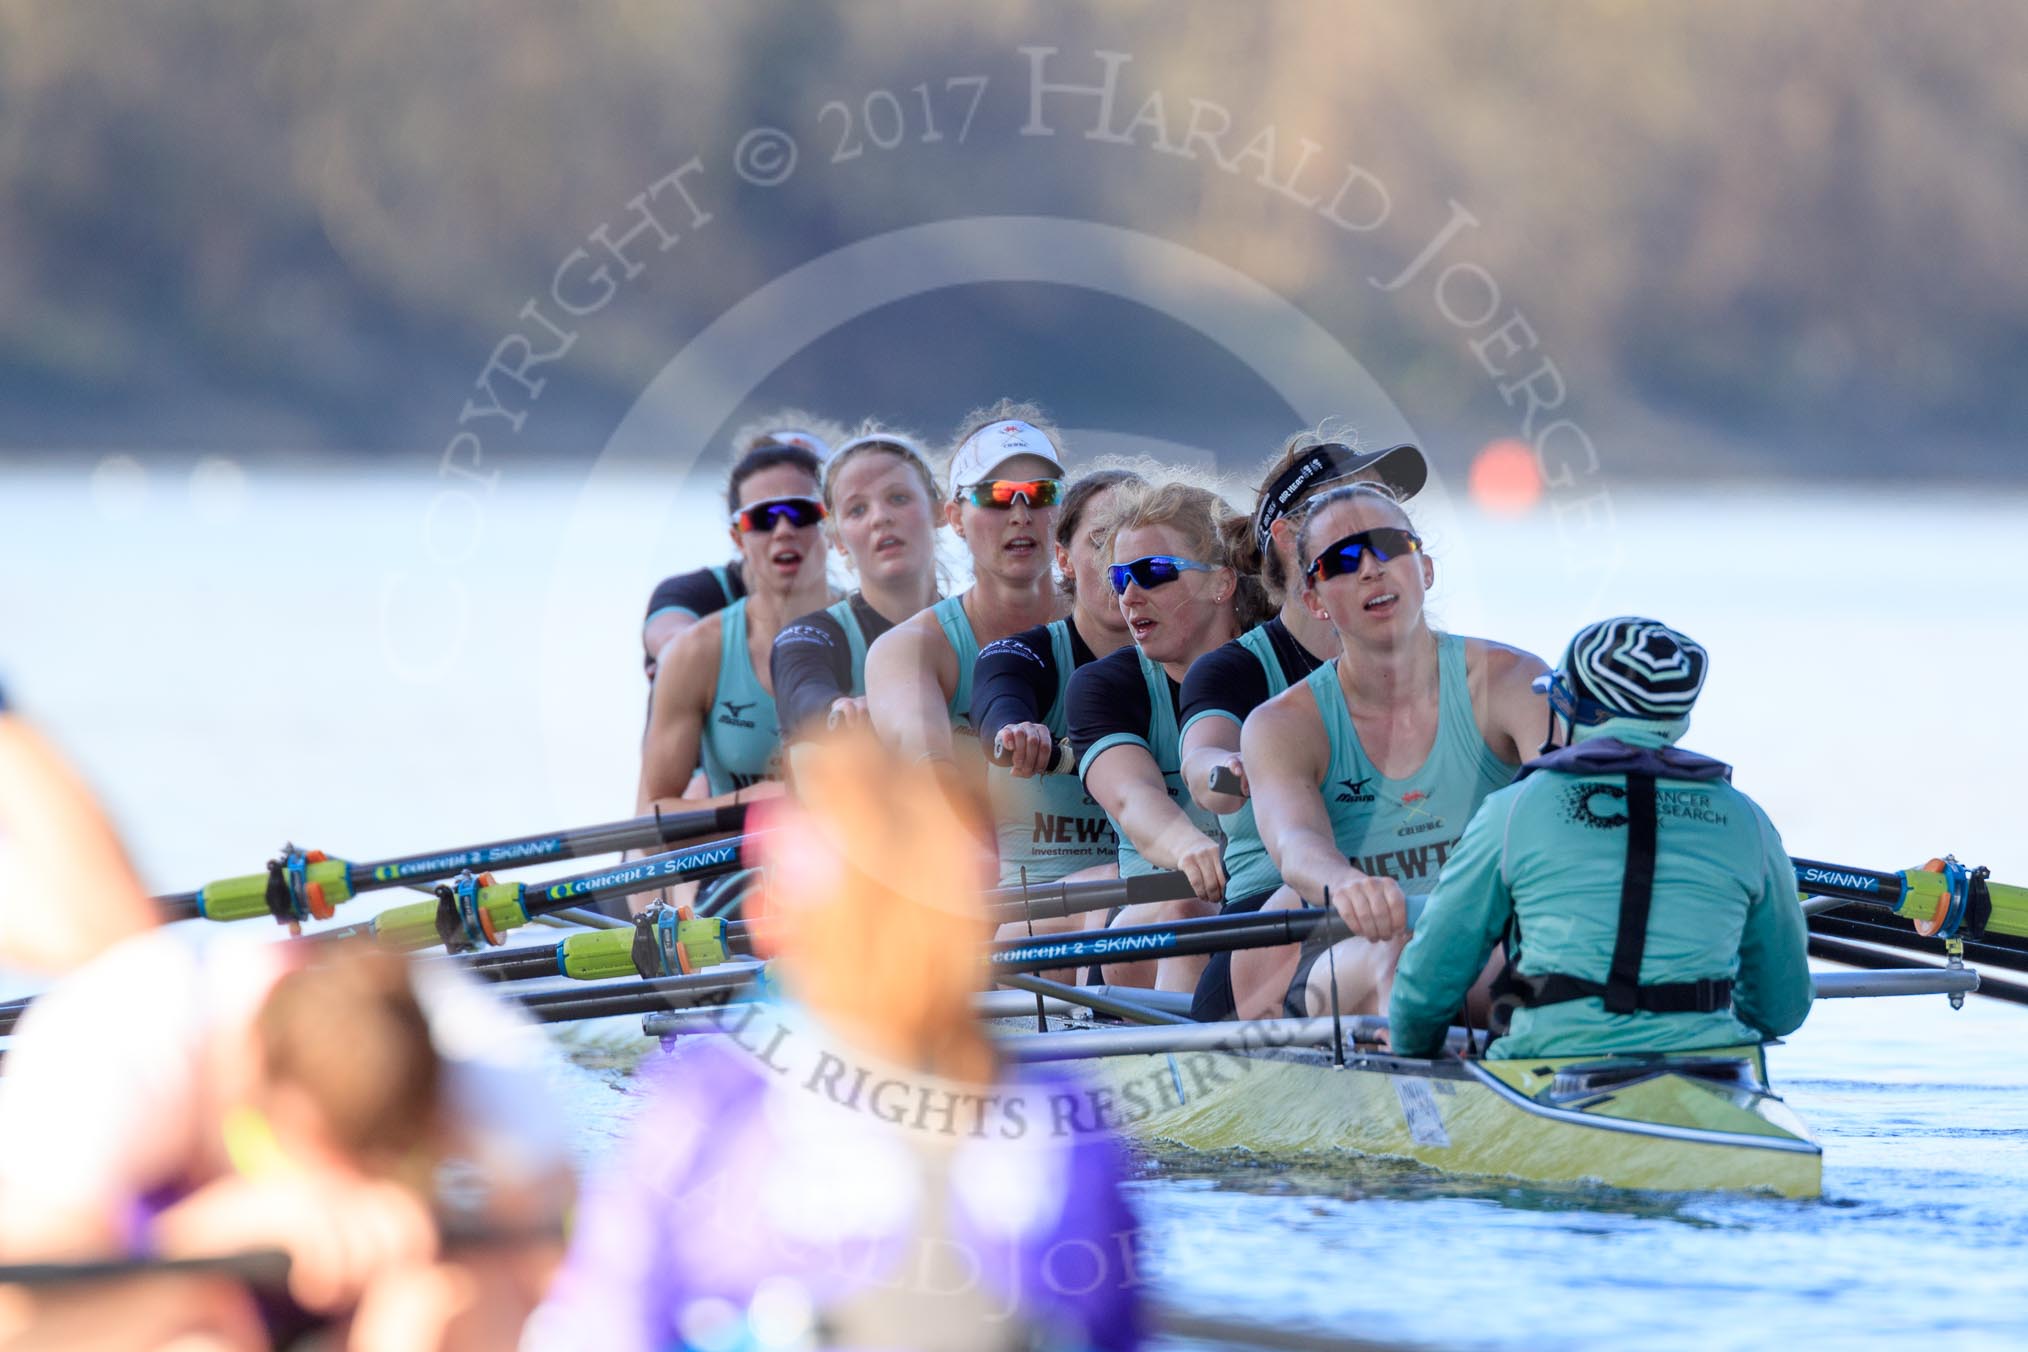 The Women's Boat Race season 2018 - fixture CUWBC vs. ULBC: OUWBC, the winner of both parts of the fixture - bow Olivia Coffey, 2 Myriam Goudet-Boukhatmi, 3 Alice White, 4 Paula Wesselmann, 5 Thea Zabell, 6 Anne Beenken, 7 Imogen Grant, stroke Tricia Smith, cox Sophie Shapter.
River Thames between Putney Bridge and Mortlake,
London SW15,

United Kingdom,
on 17 February 2018 at 13:35, image #176